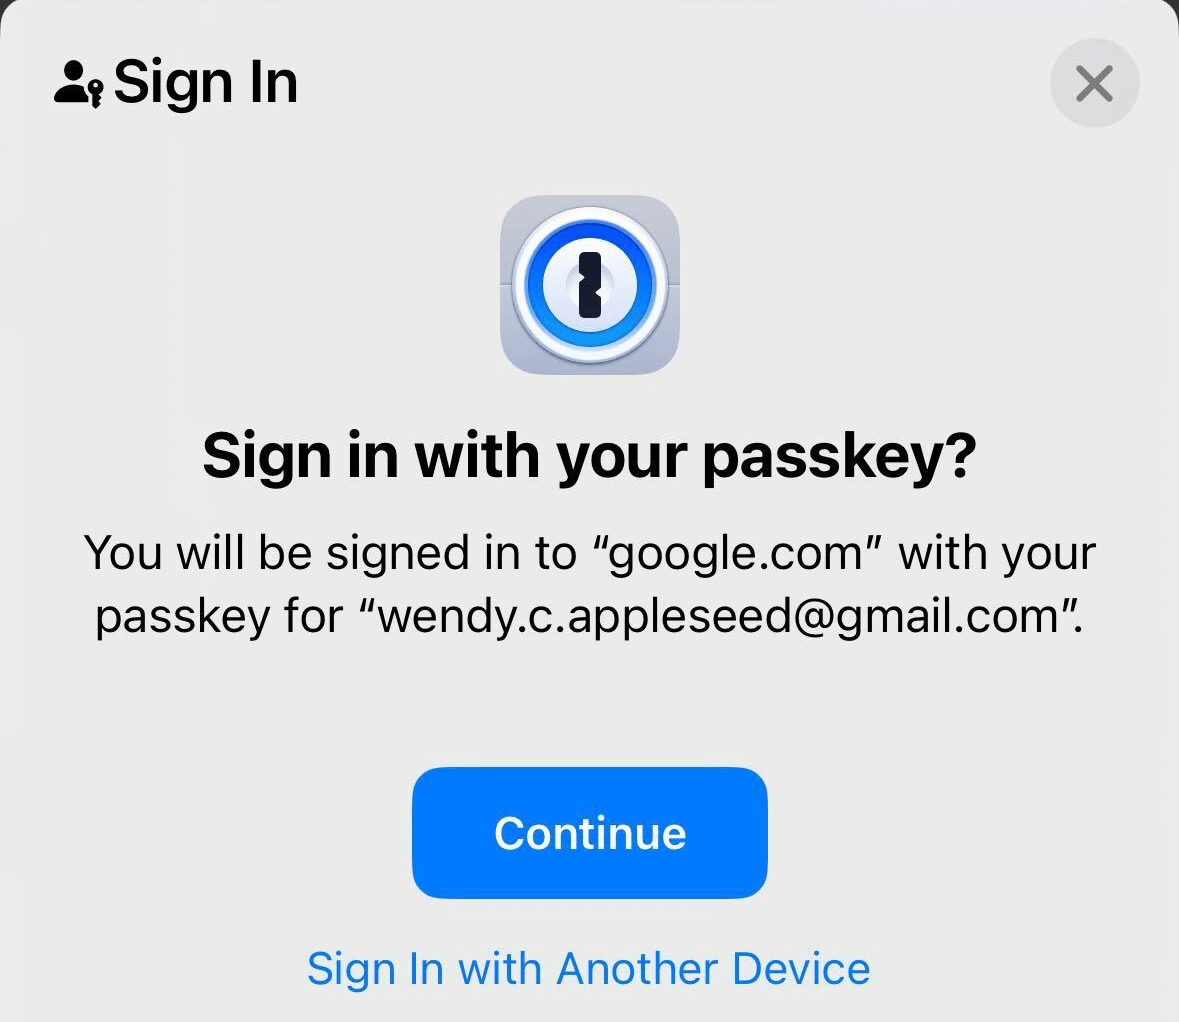 Signing in with a passkey using 1Password for iOS